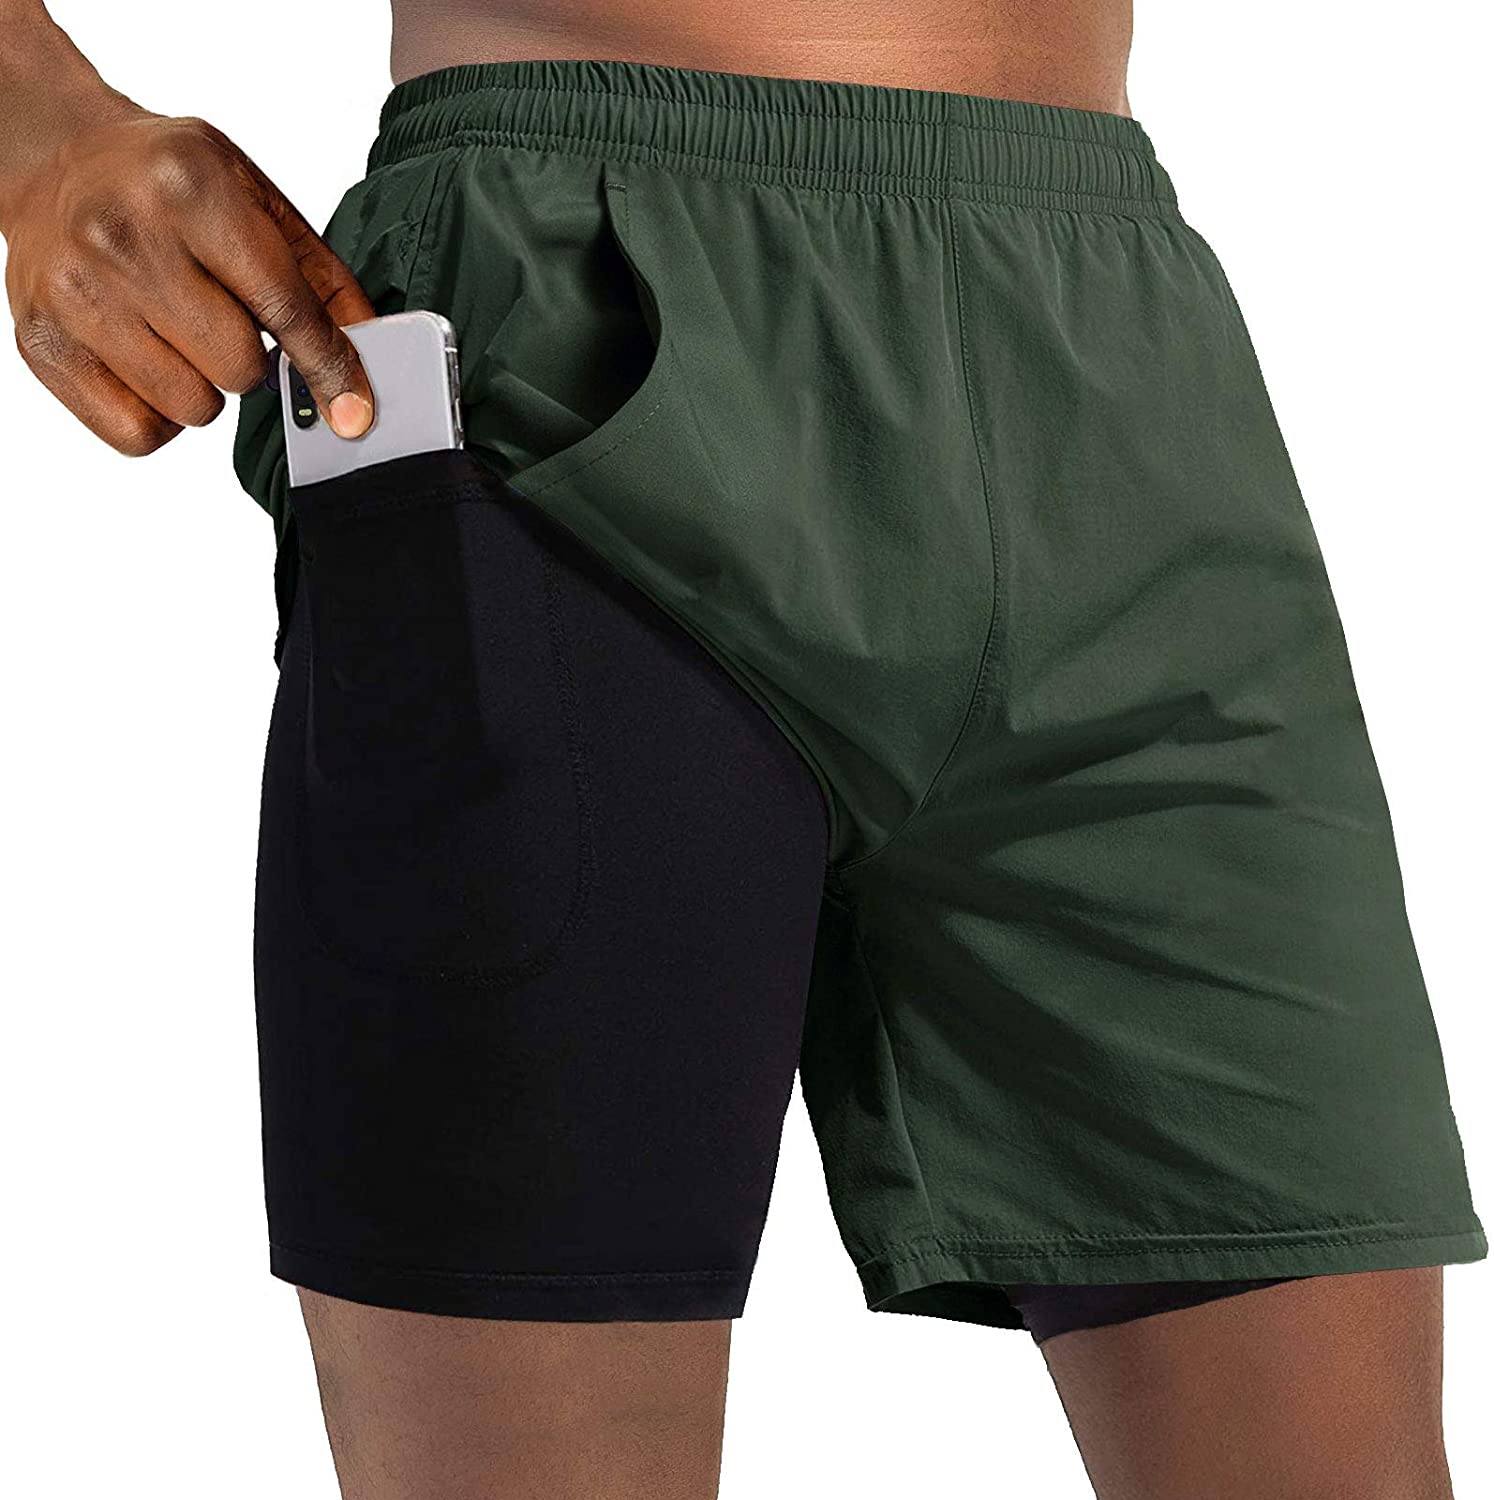 A WATERWANG Mens 2 in 1 Running Shorts Quick Dry Workout Athletic Jogging Shorts with Pockets